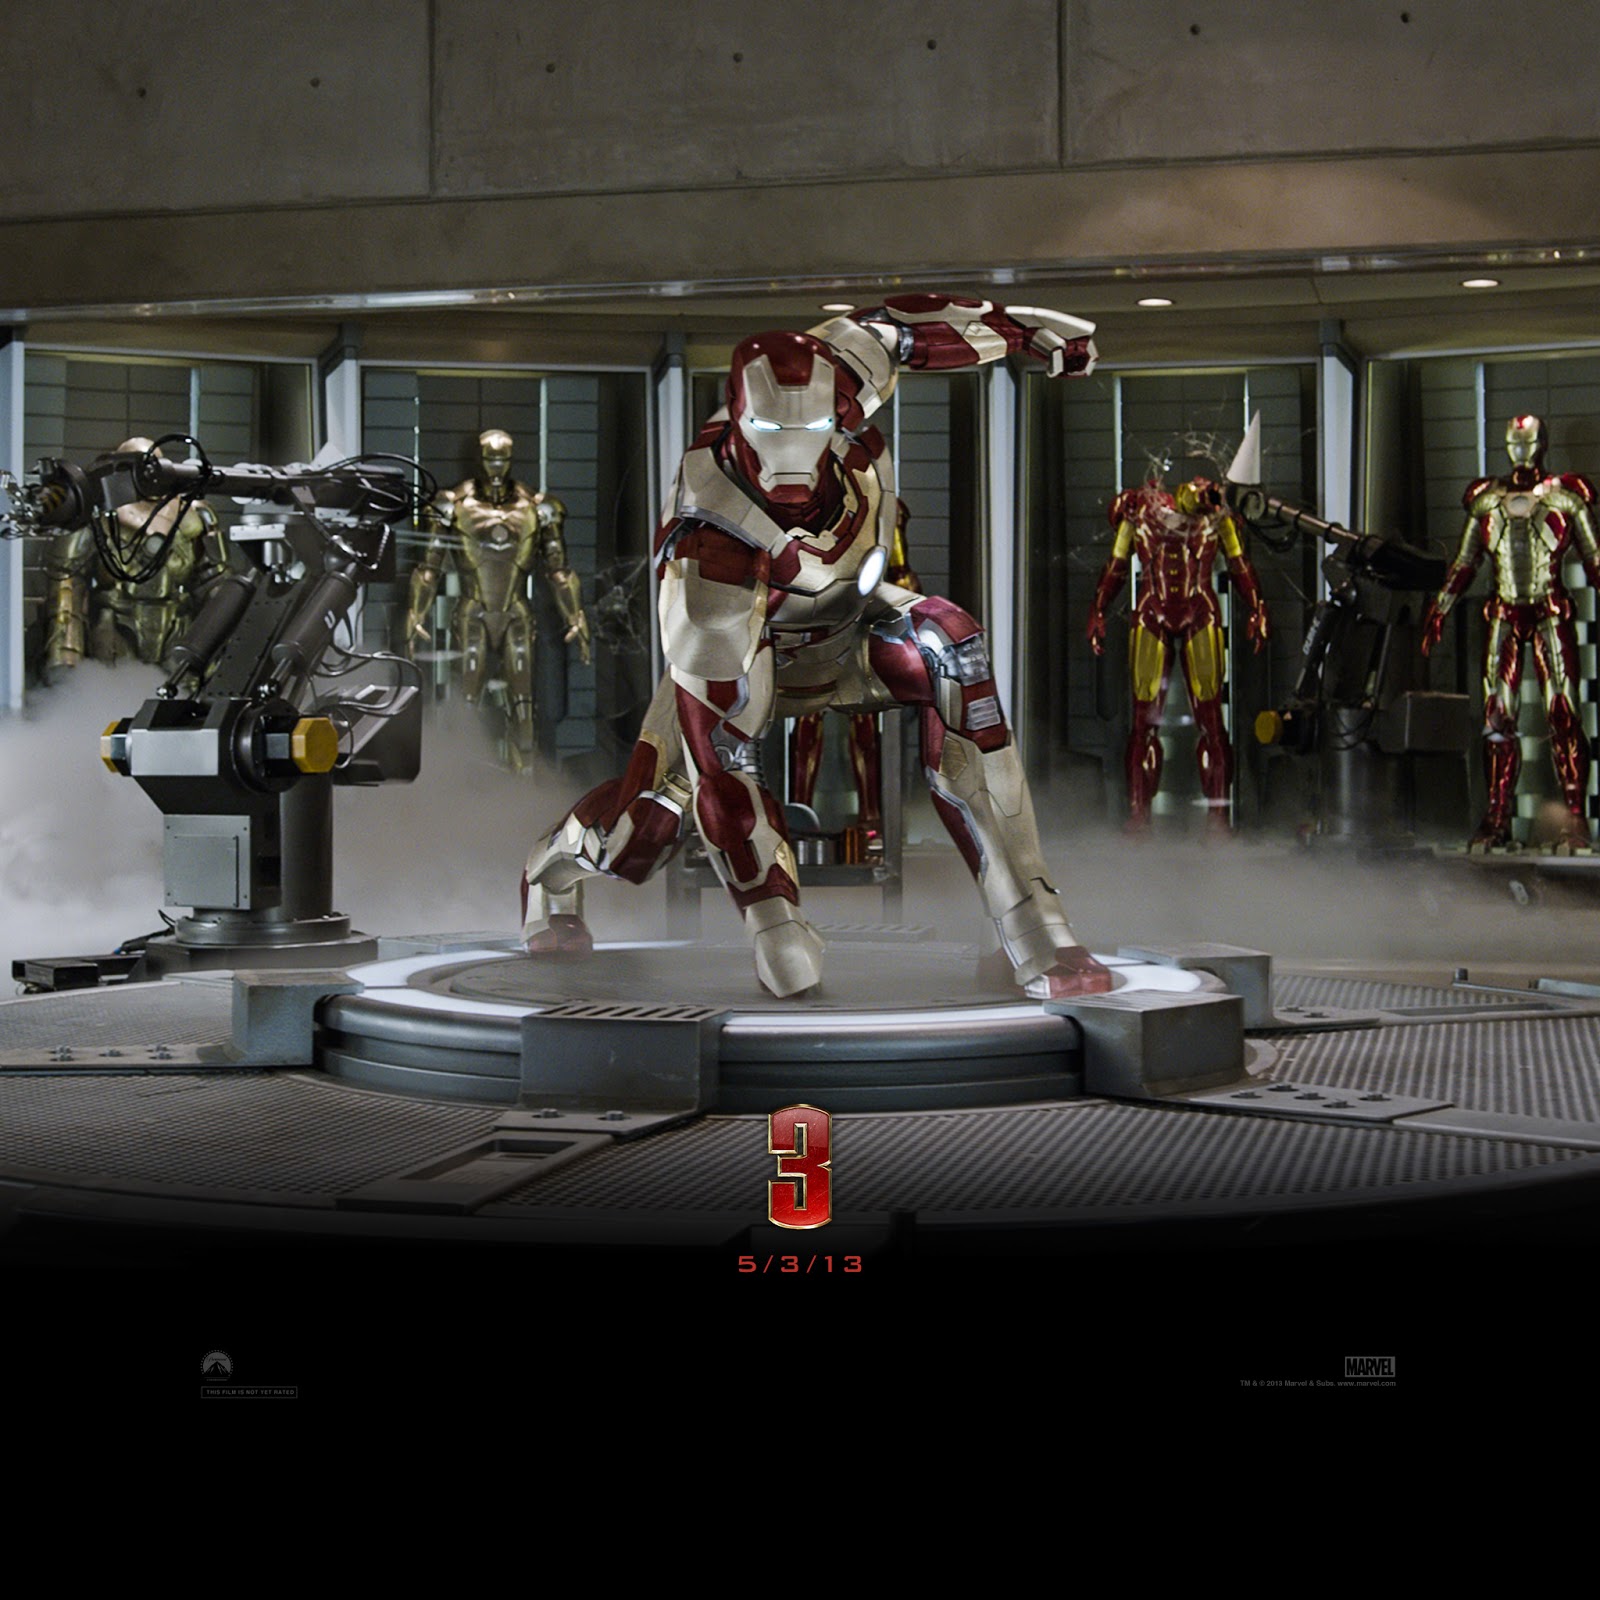 ... Iron Man 3 Movie Wallpapers - Everything about PowerPoint & Wallpapers